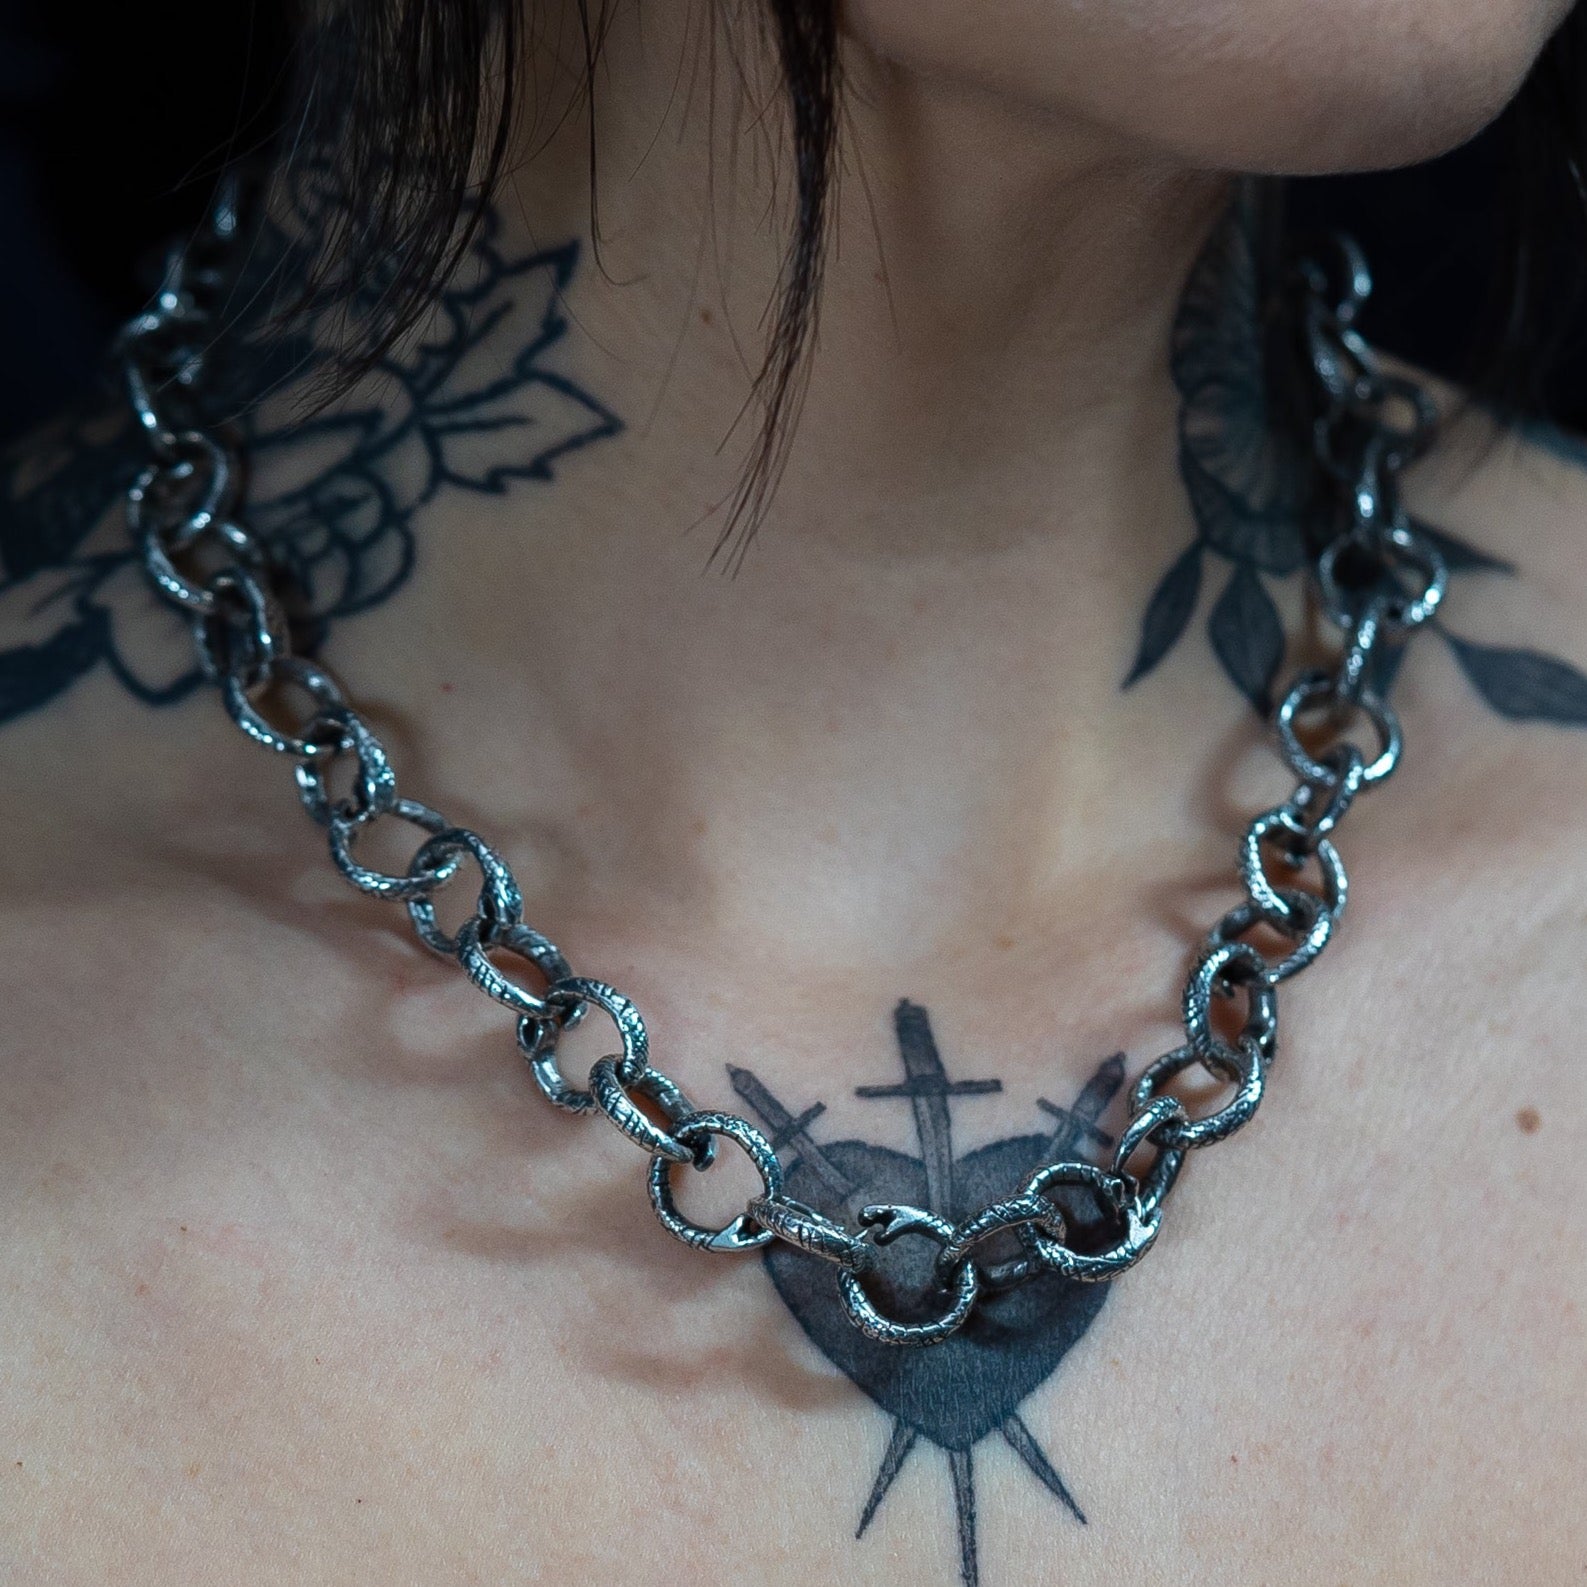 handmade chain snake link necklace in sterling silver on a gothic aesthetic style female model with neck tattoos